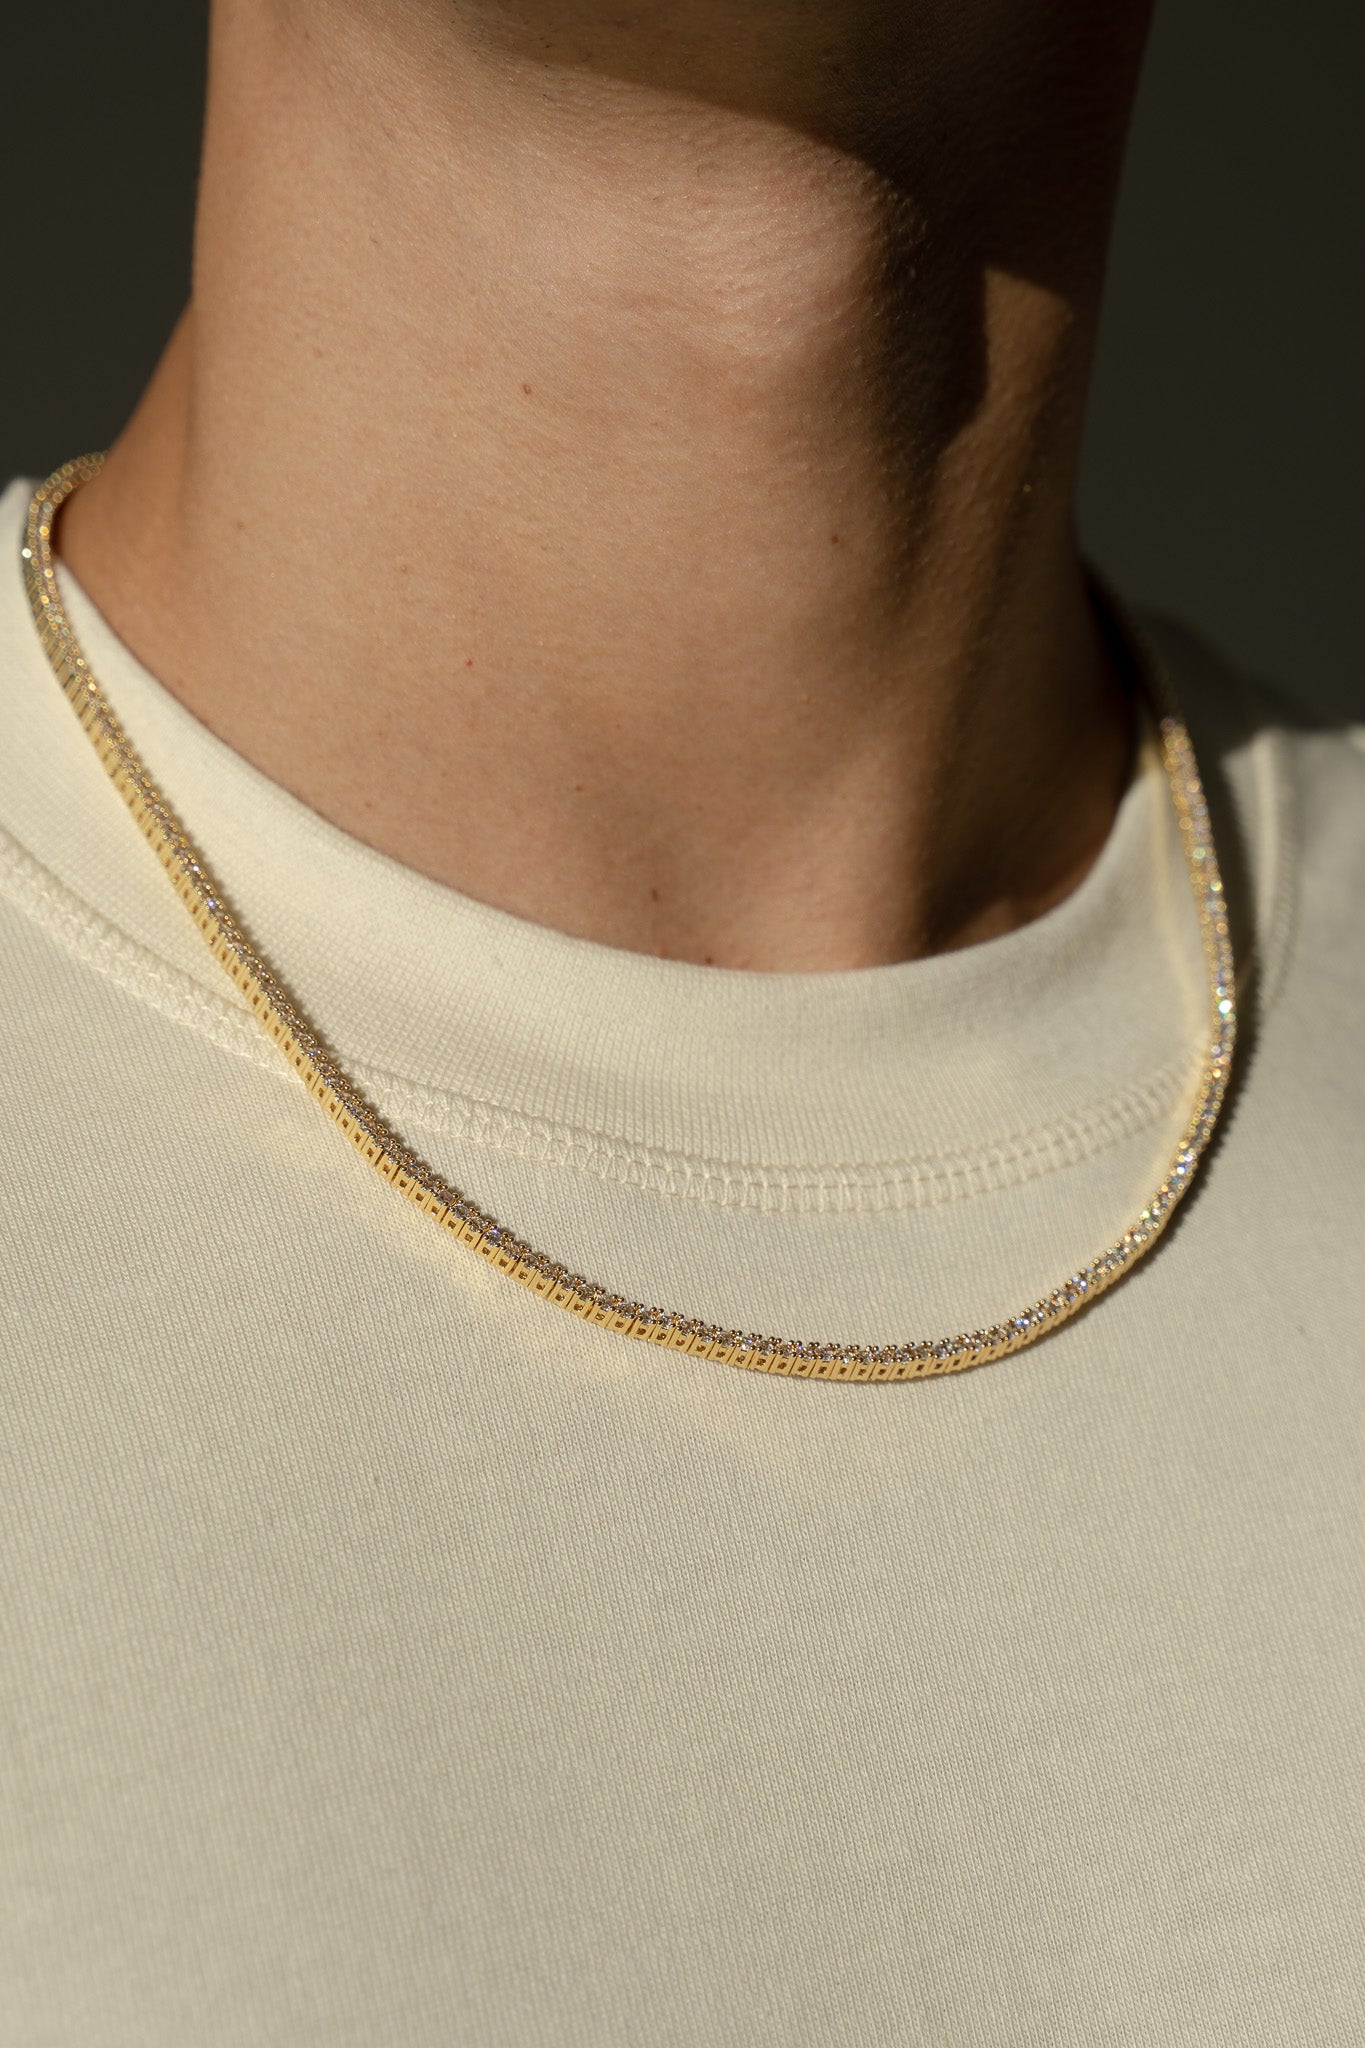 Heirloom Tennis Necklace in Gold - 2mm